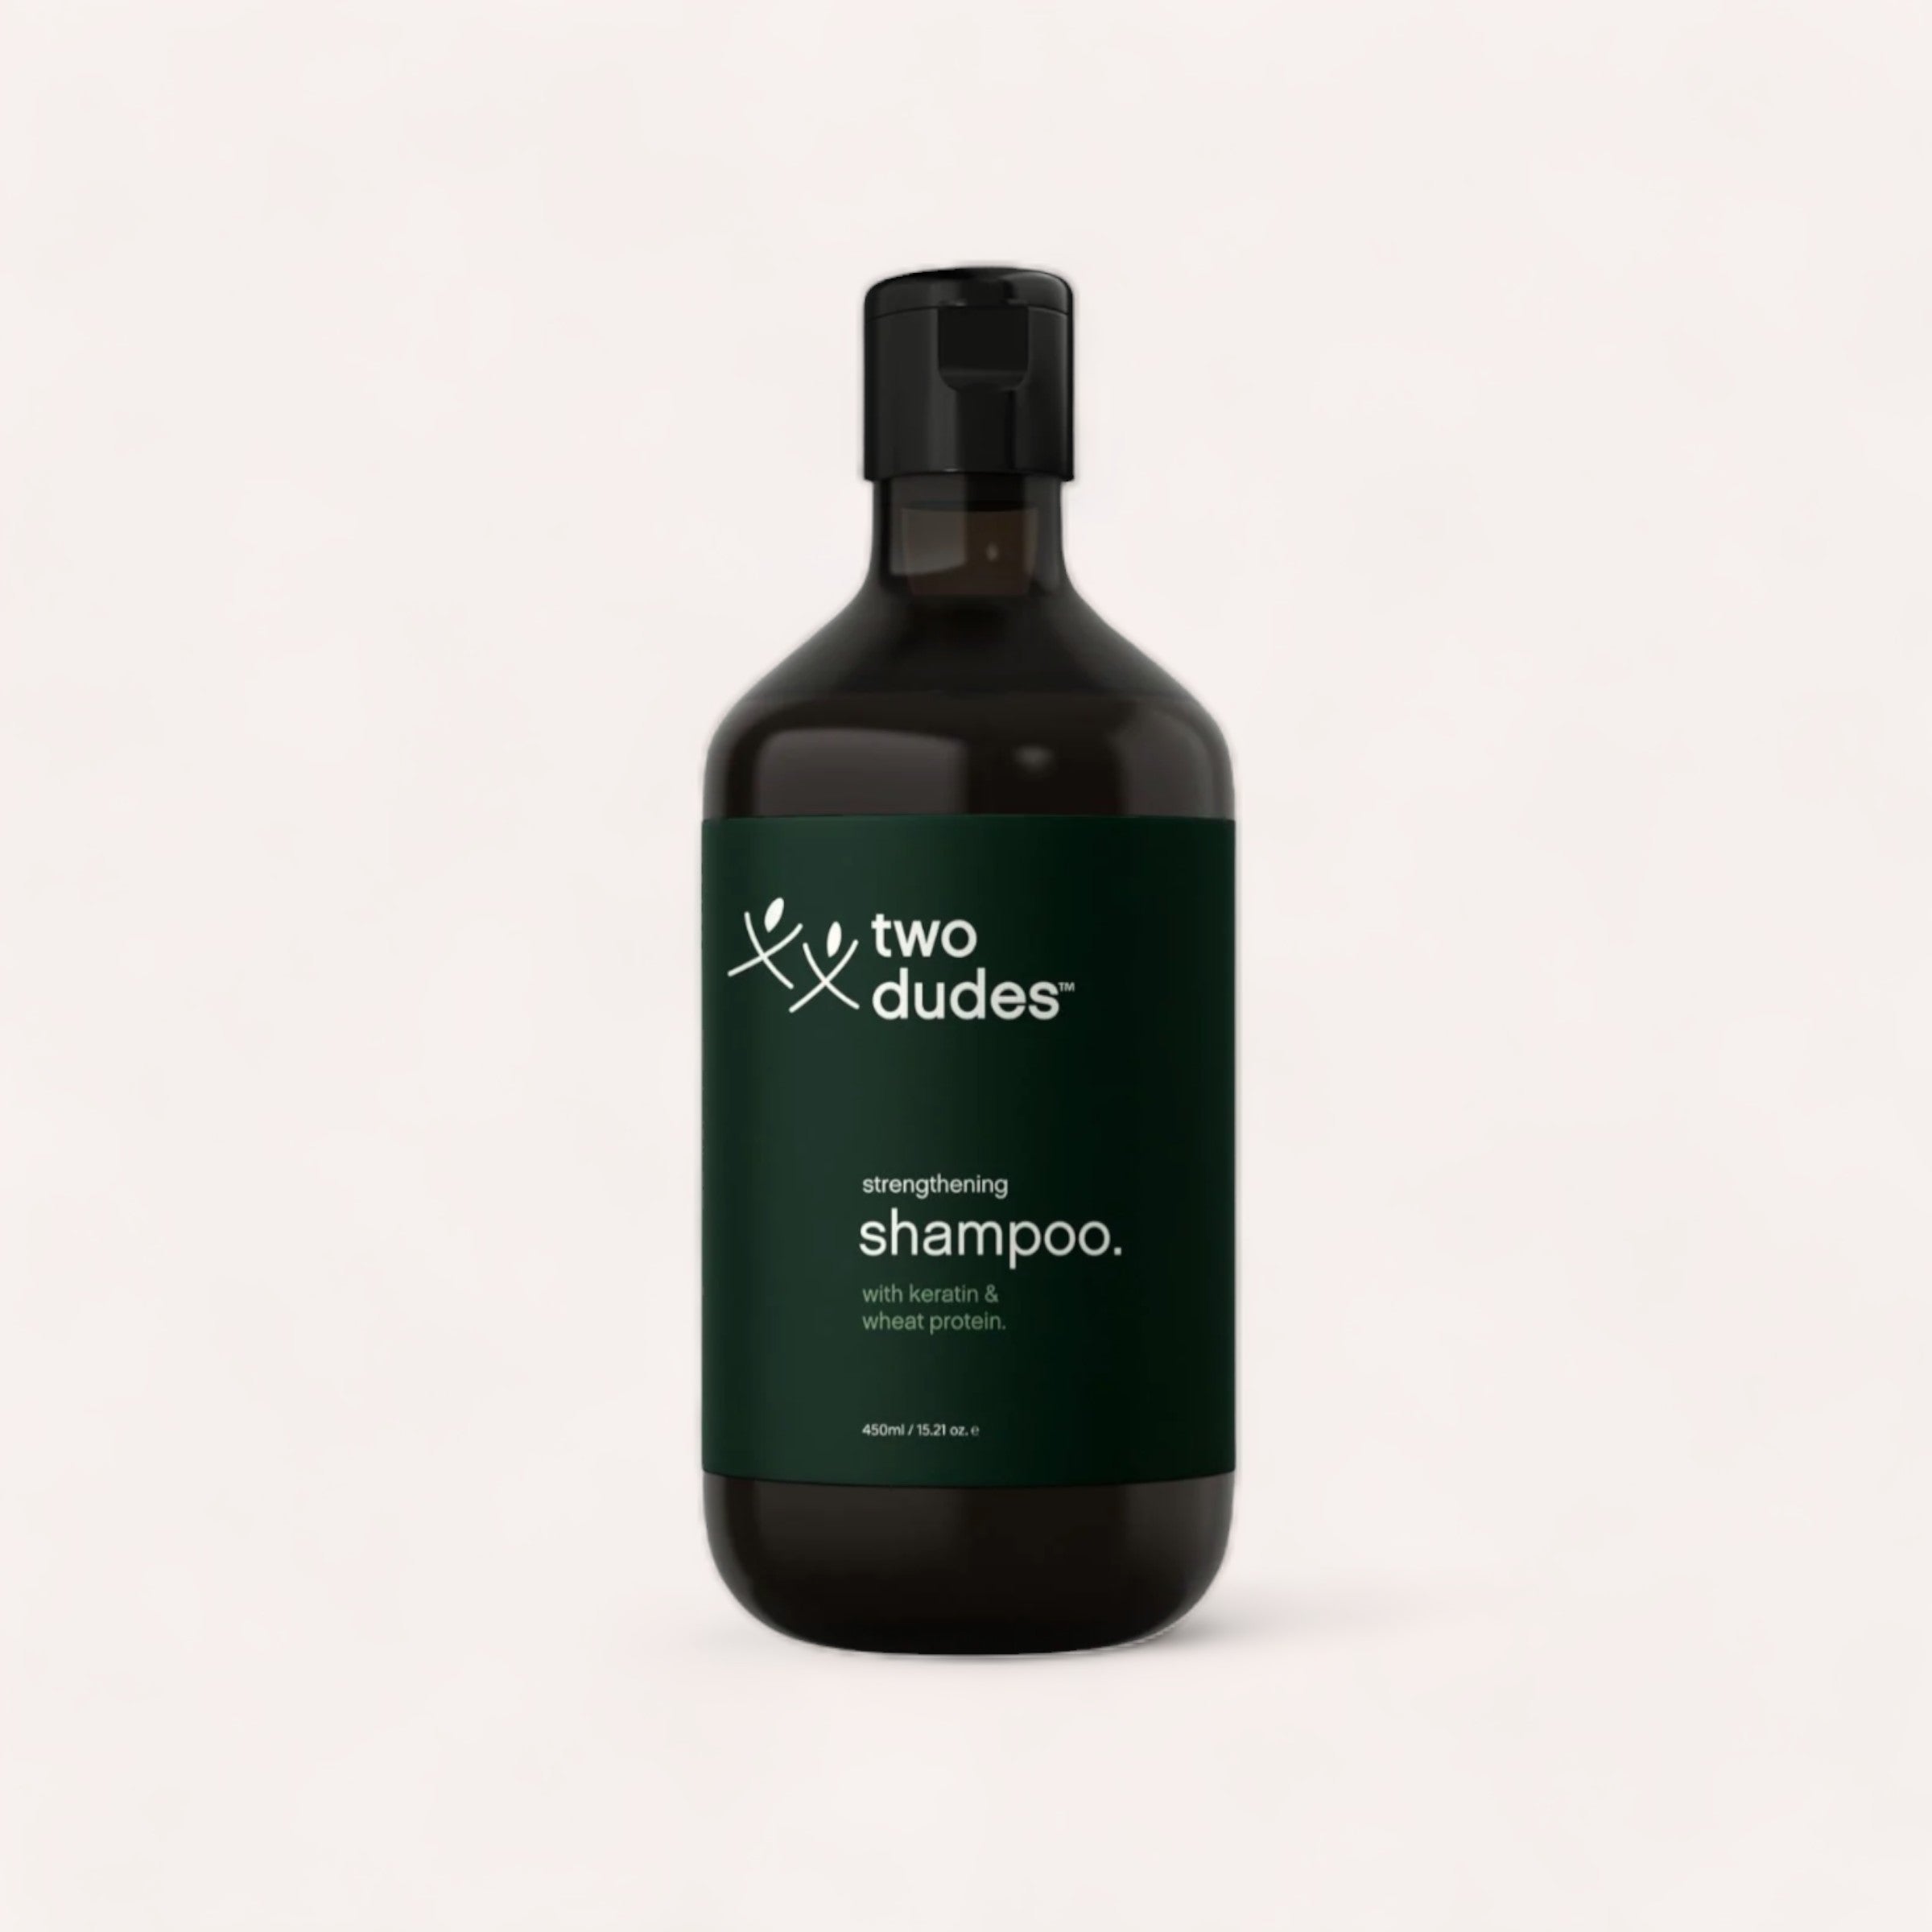 A sleek bottle of Shampoo by Two Dudes hair growth strengthening shampoo with keratin and wheat protein against a neutral background.